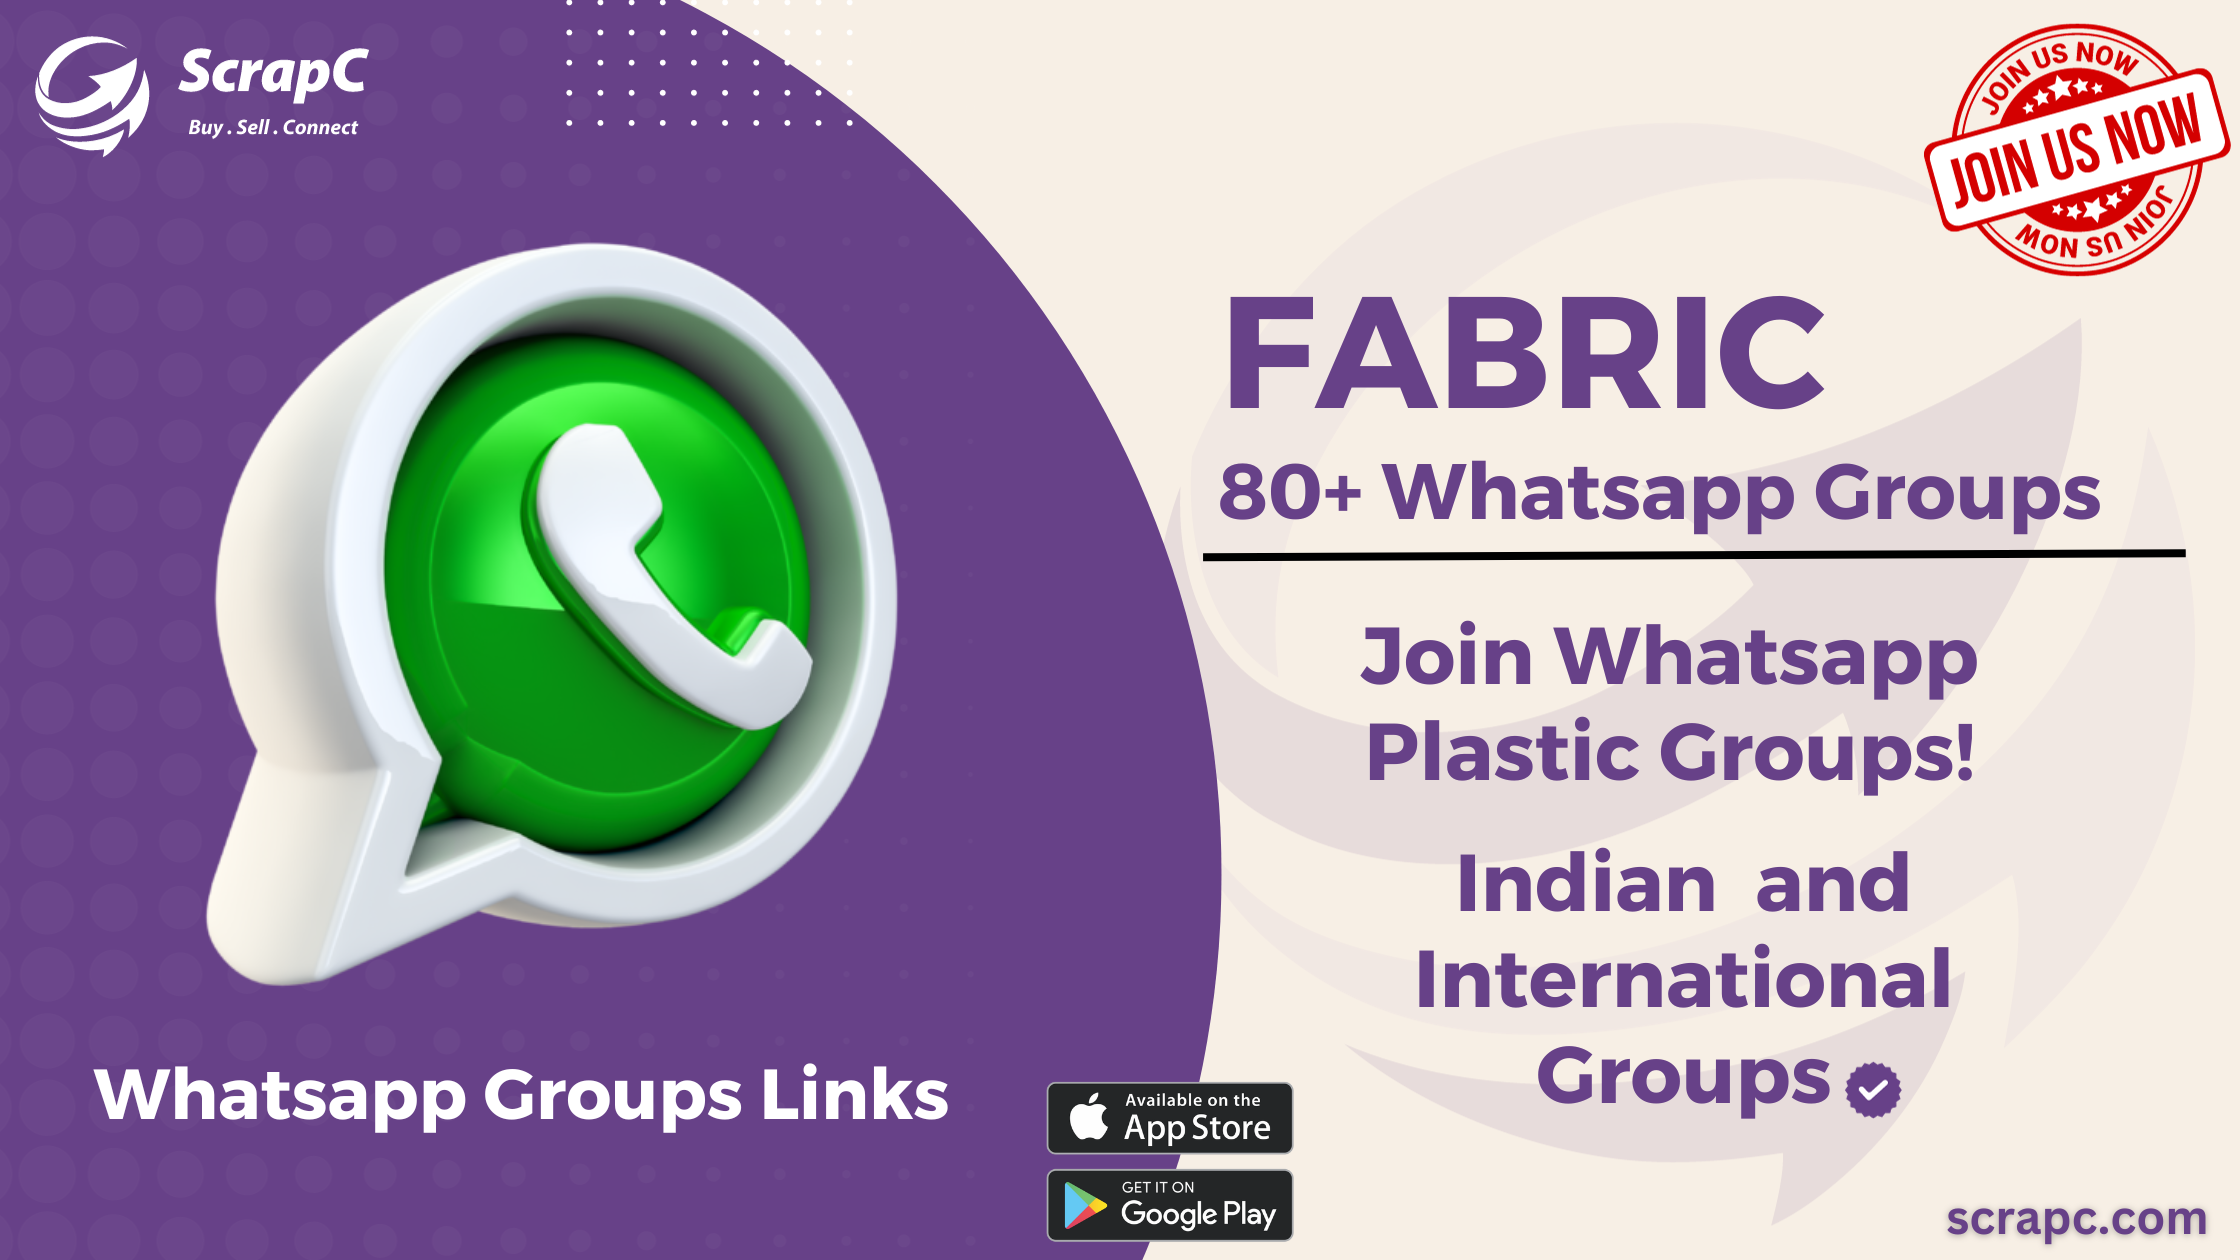 Join Fabric and Stocklot WhatsApp Groups - Explore various fabric types and connect with industry professionals and enthusiasts.